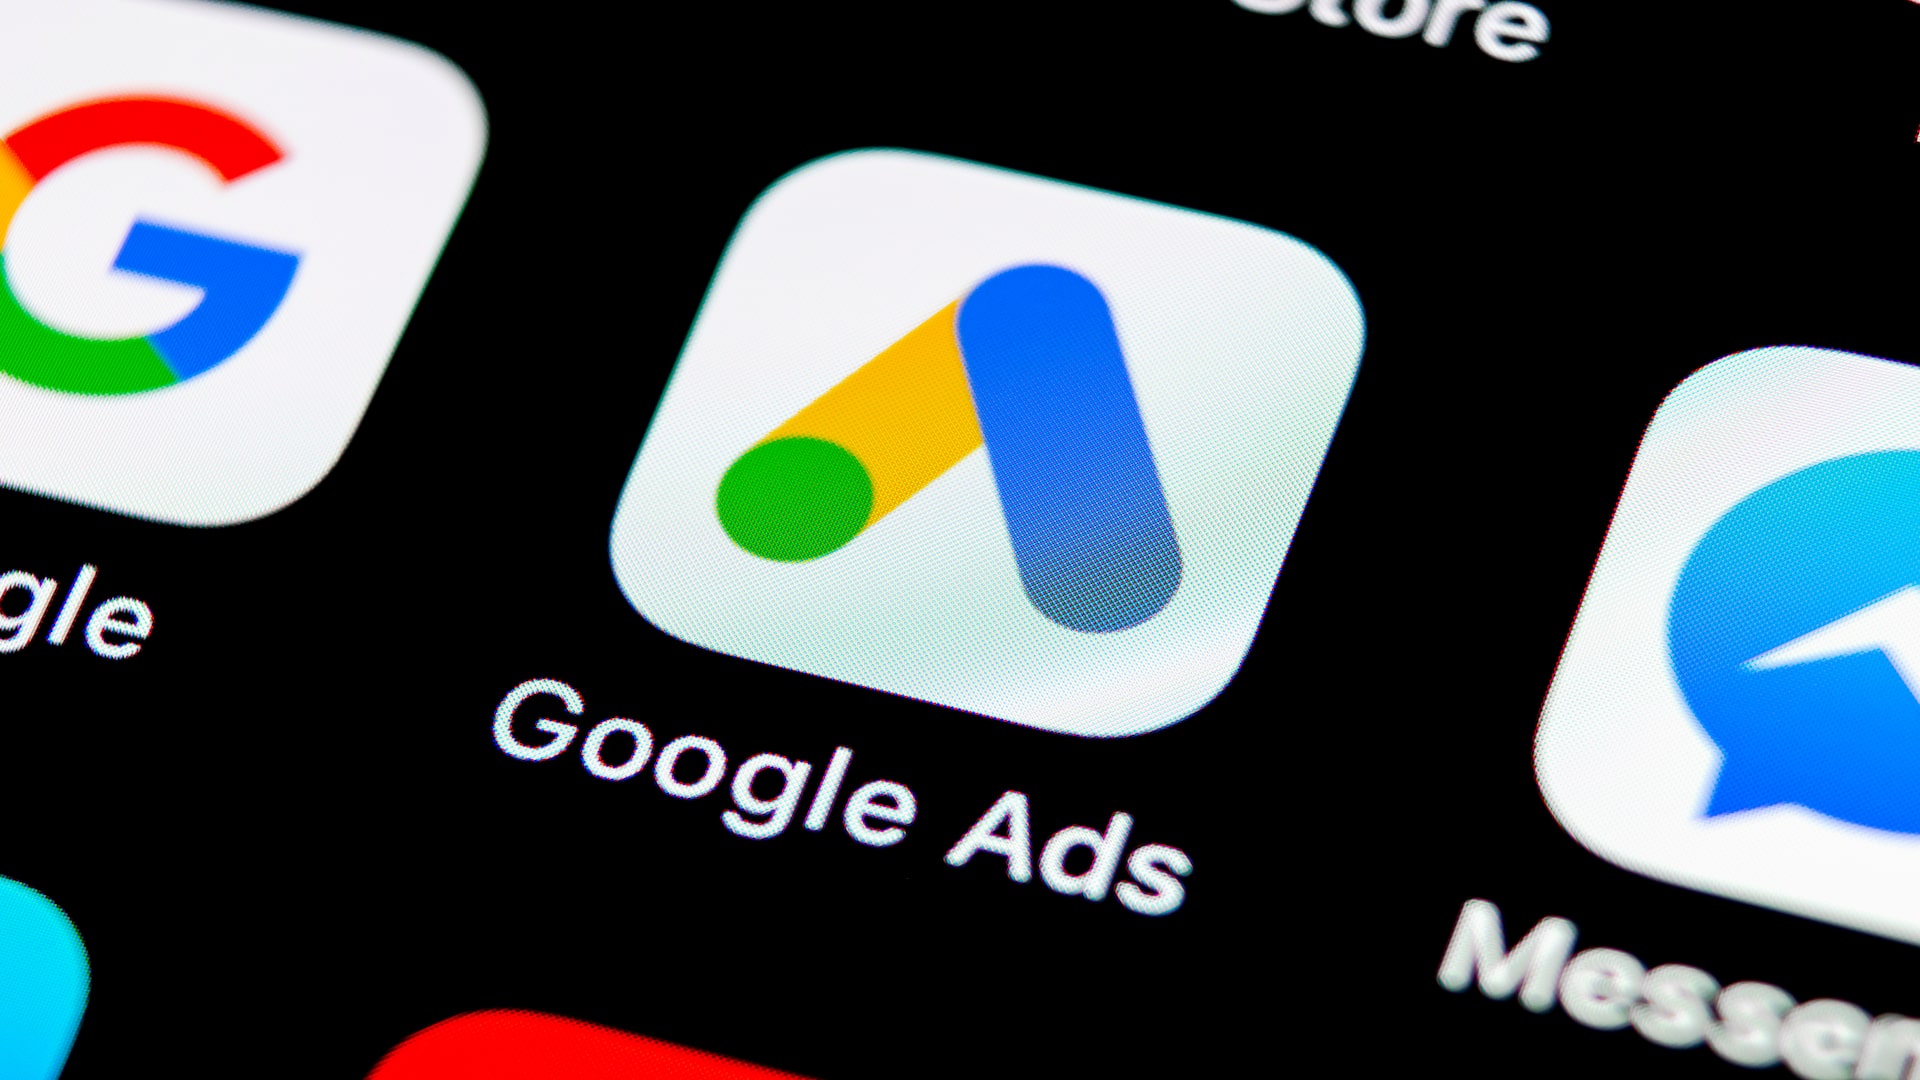 Google Ads rolls out Demand Gen to all customers globally